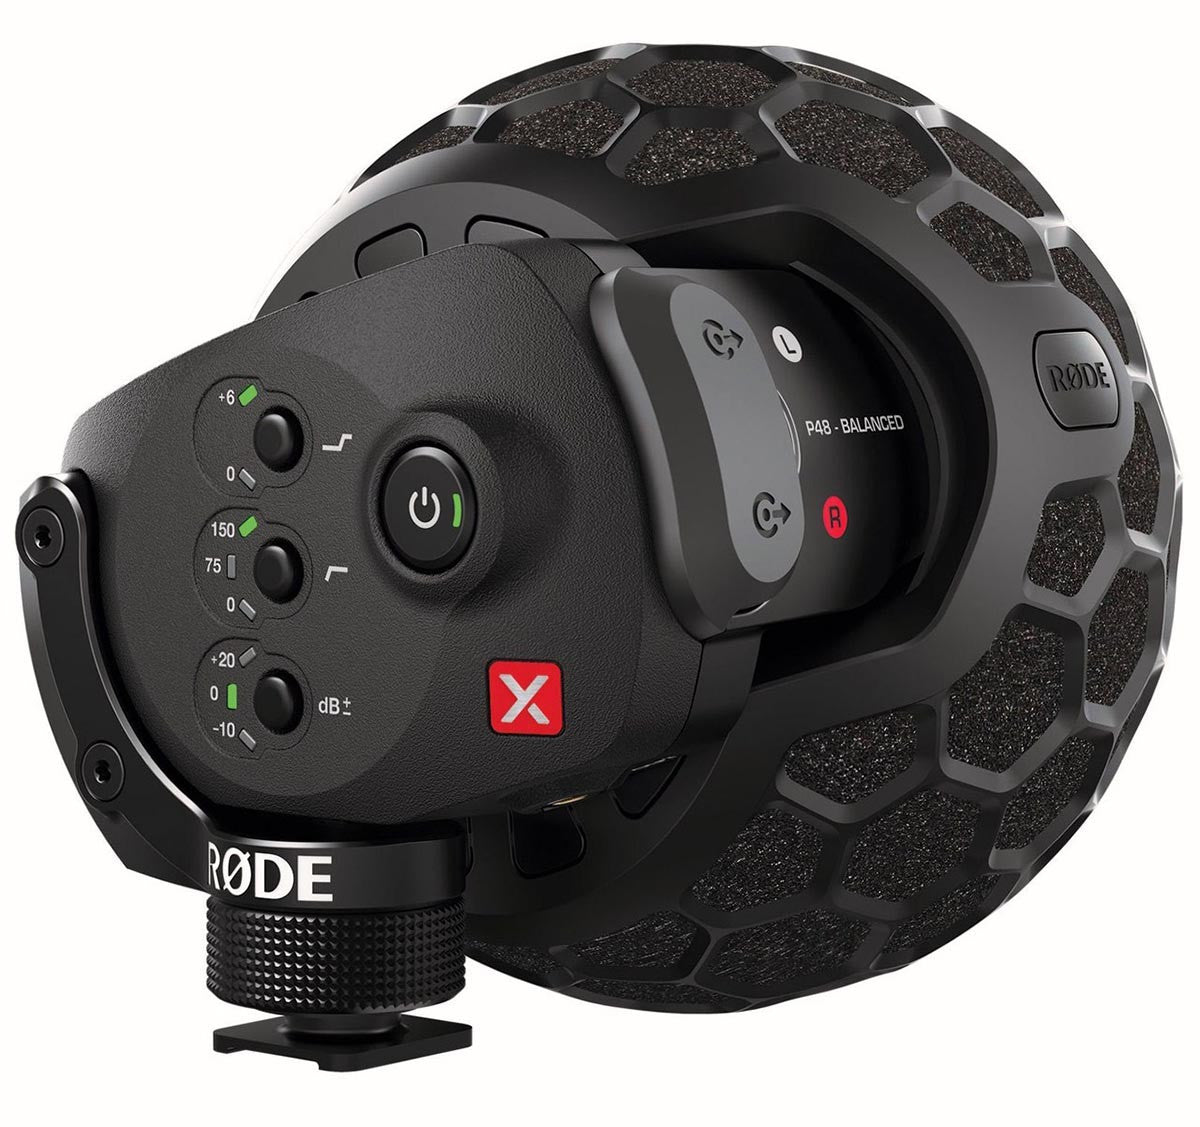 Rode Stereo VideoMic X Stereo Microphone, video audio microphones & recorders, RODE - Pictureline  - 1